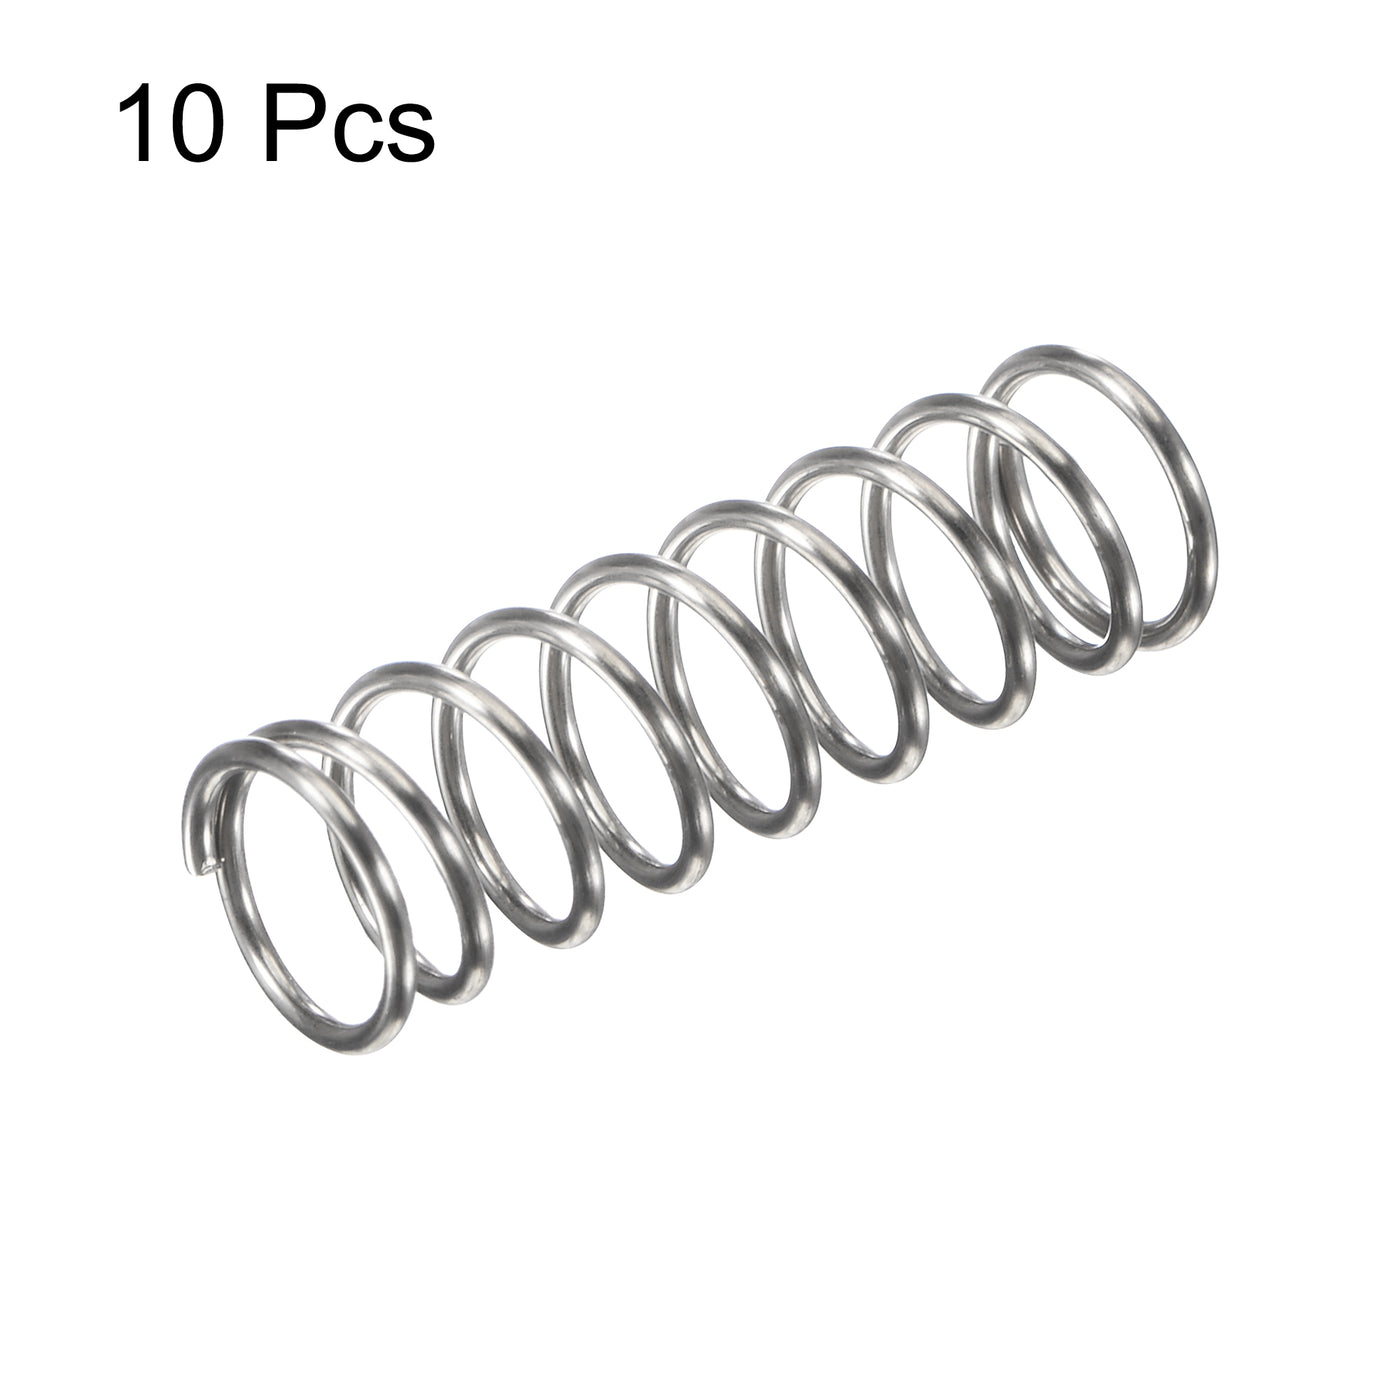 uxcell Uxcell 8mmx0.8mmx25mm 304 Stainless Steel Compression Spring 11.8N Load Capacity 10pcs